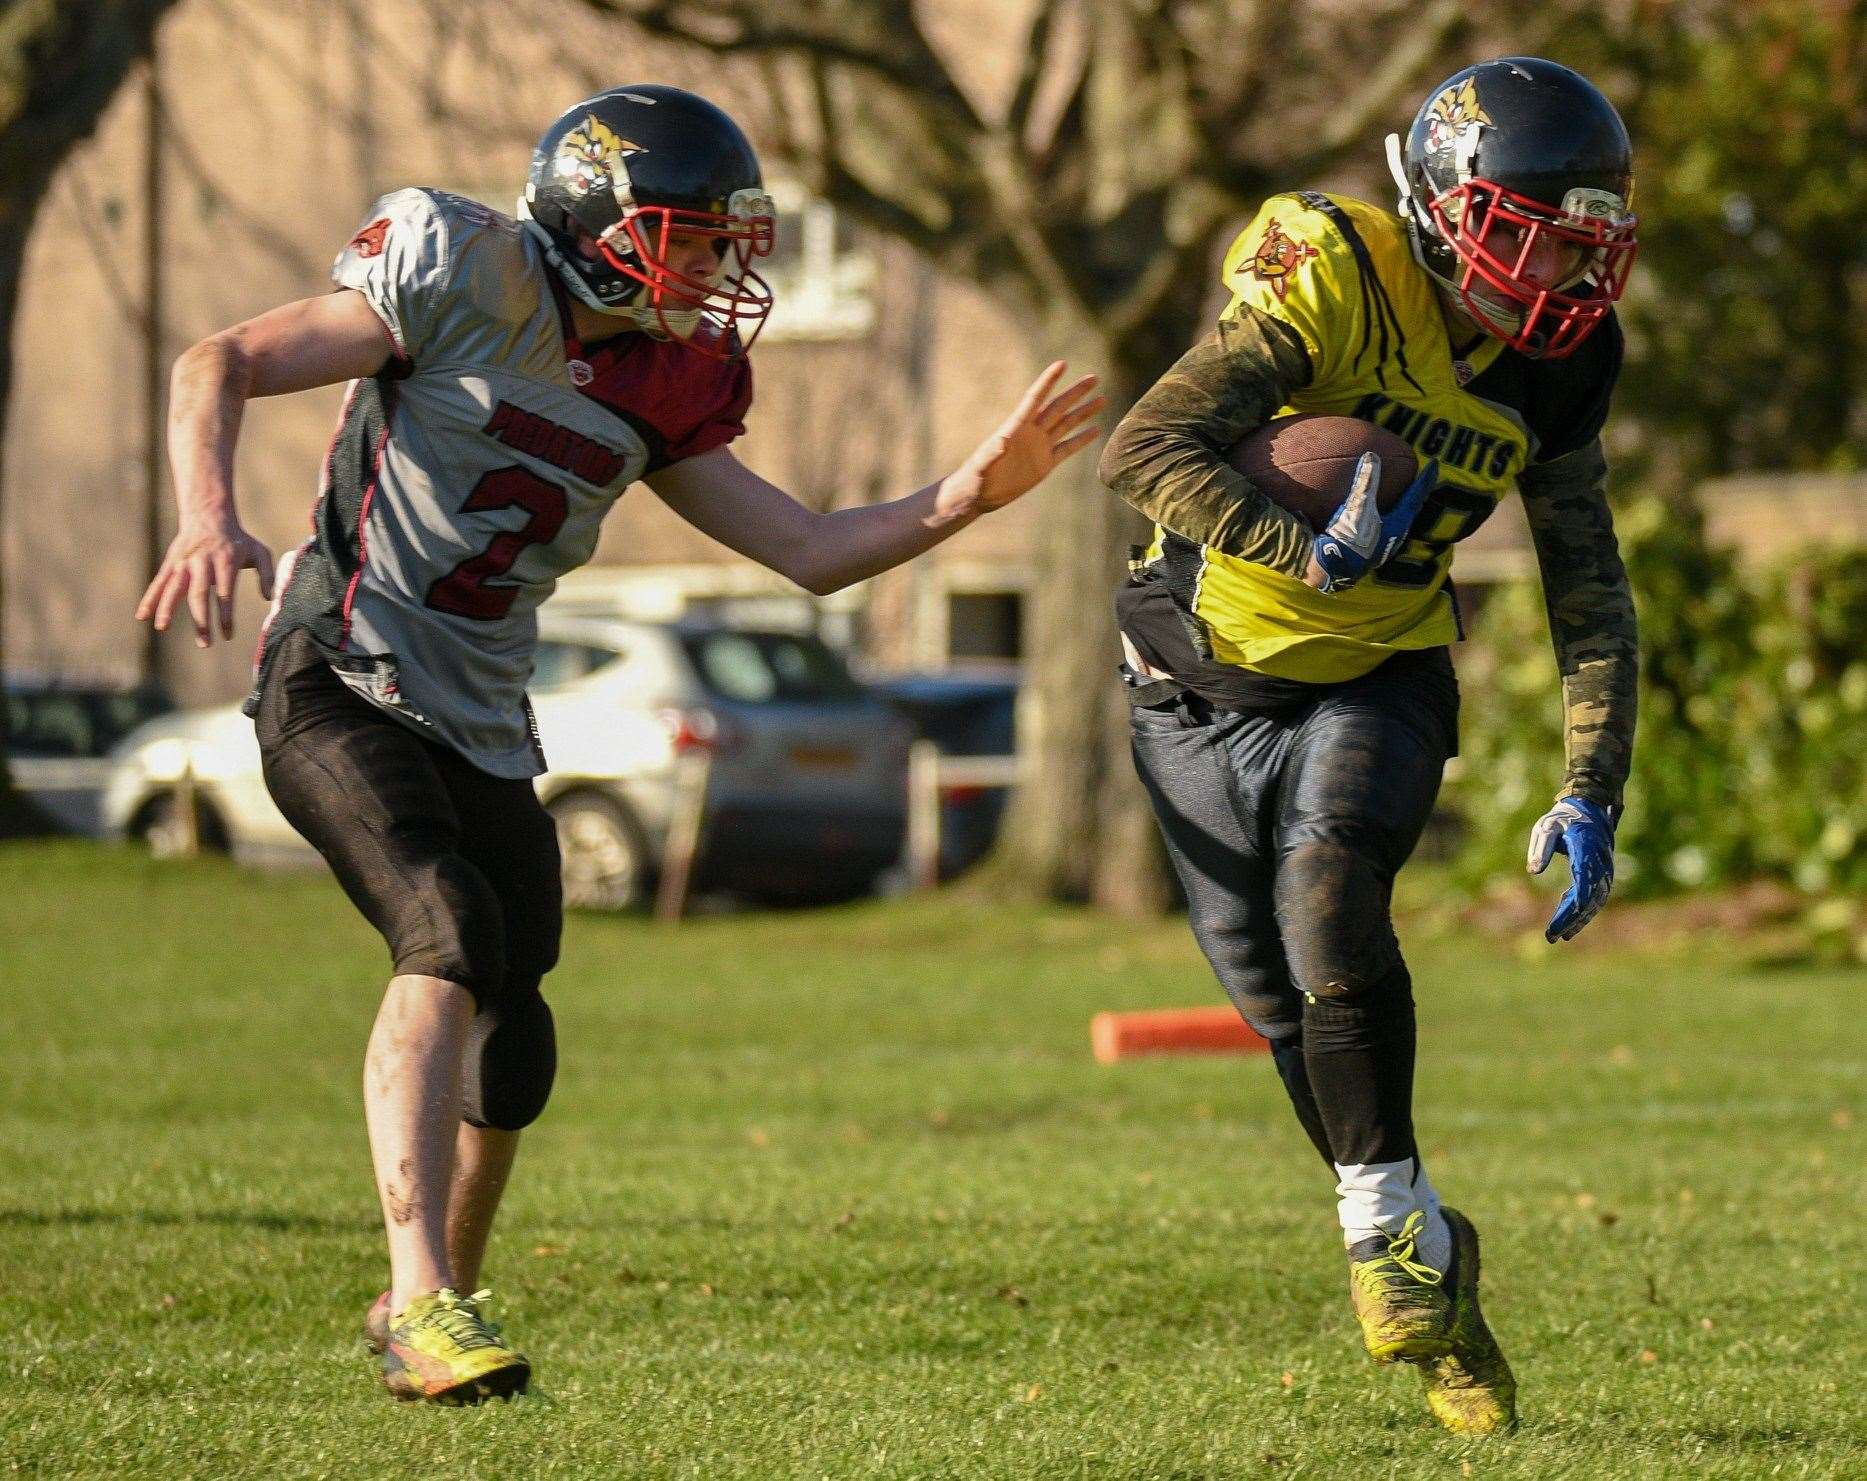 The Charleston Knights were the big winners on the opening round of games in the Highland Academies Community League, beating both the Inverness High School Predators and the composite Sharks team, made up of pupils from Inverness Royal Academy, Millburn Academy and Dingwall Academy. Picture: Scott MacDonald